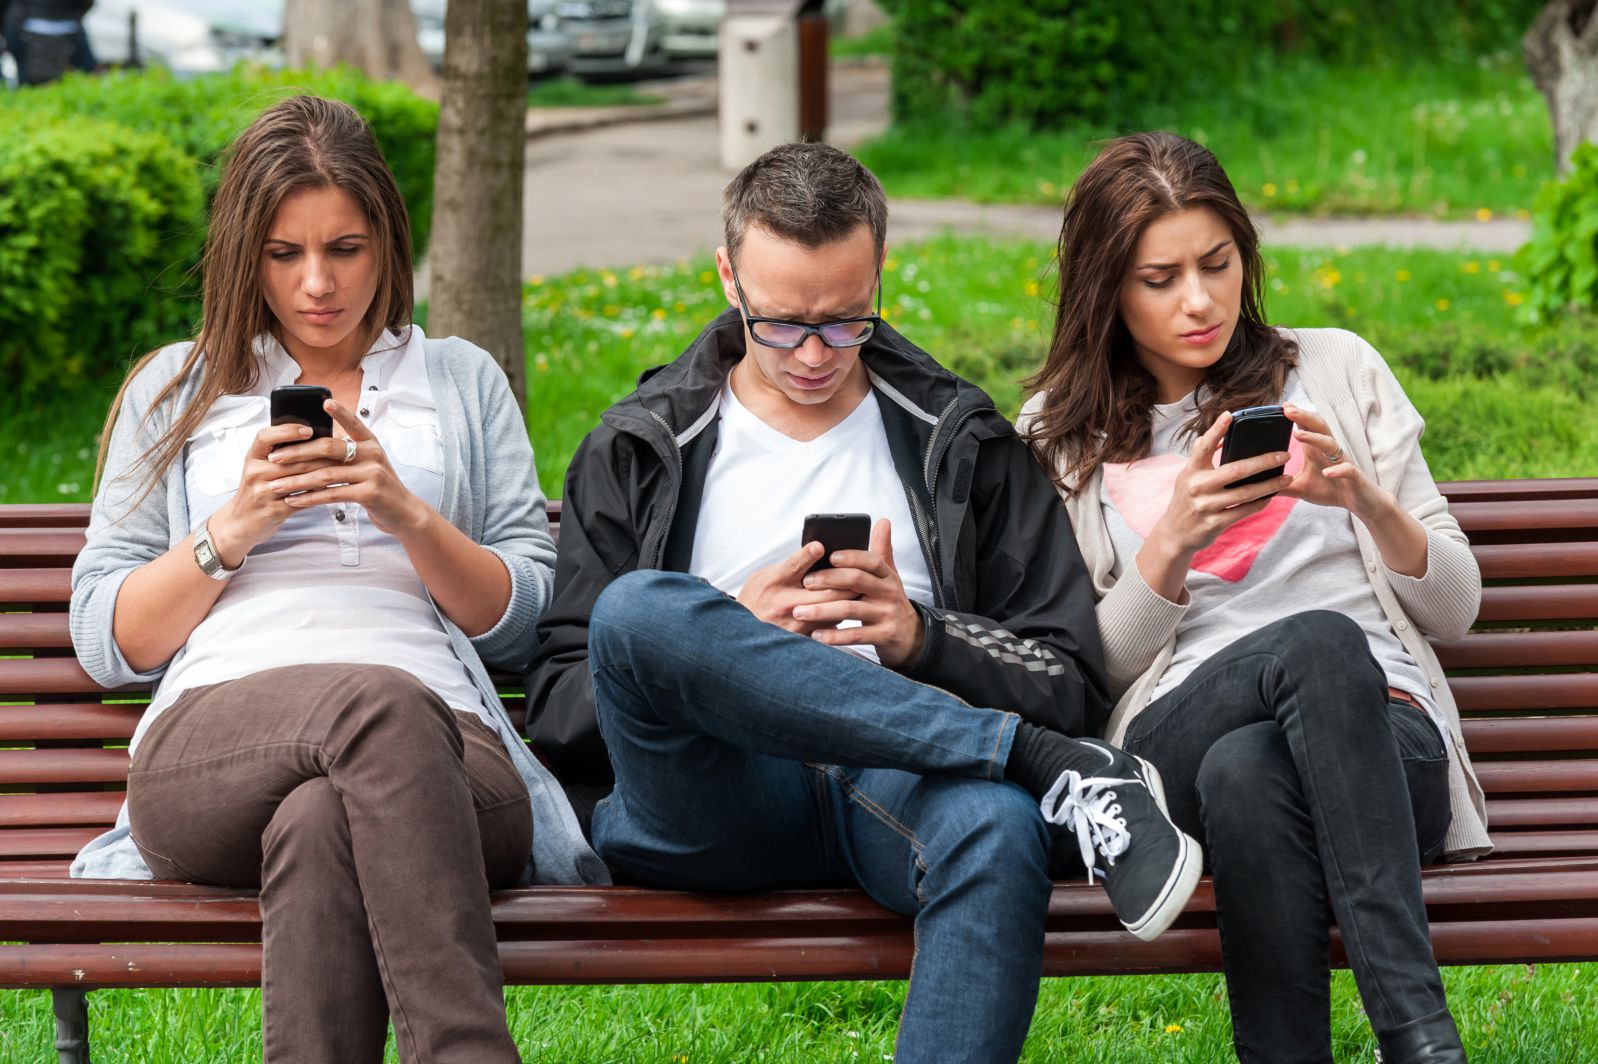 Color image of two female teens and one male teen sitting on park bench, staring at their smartphones.